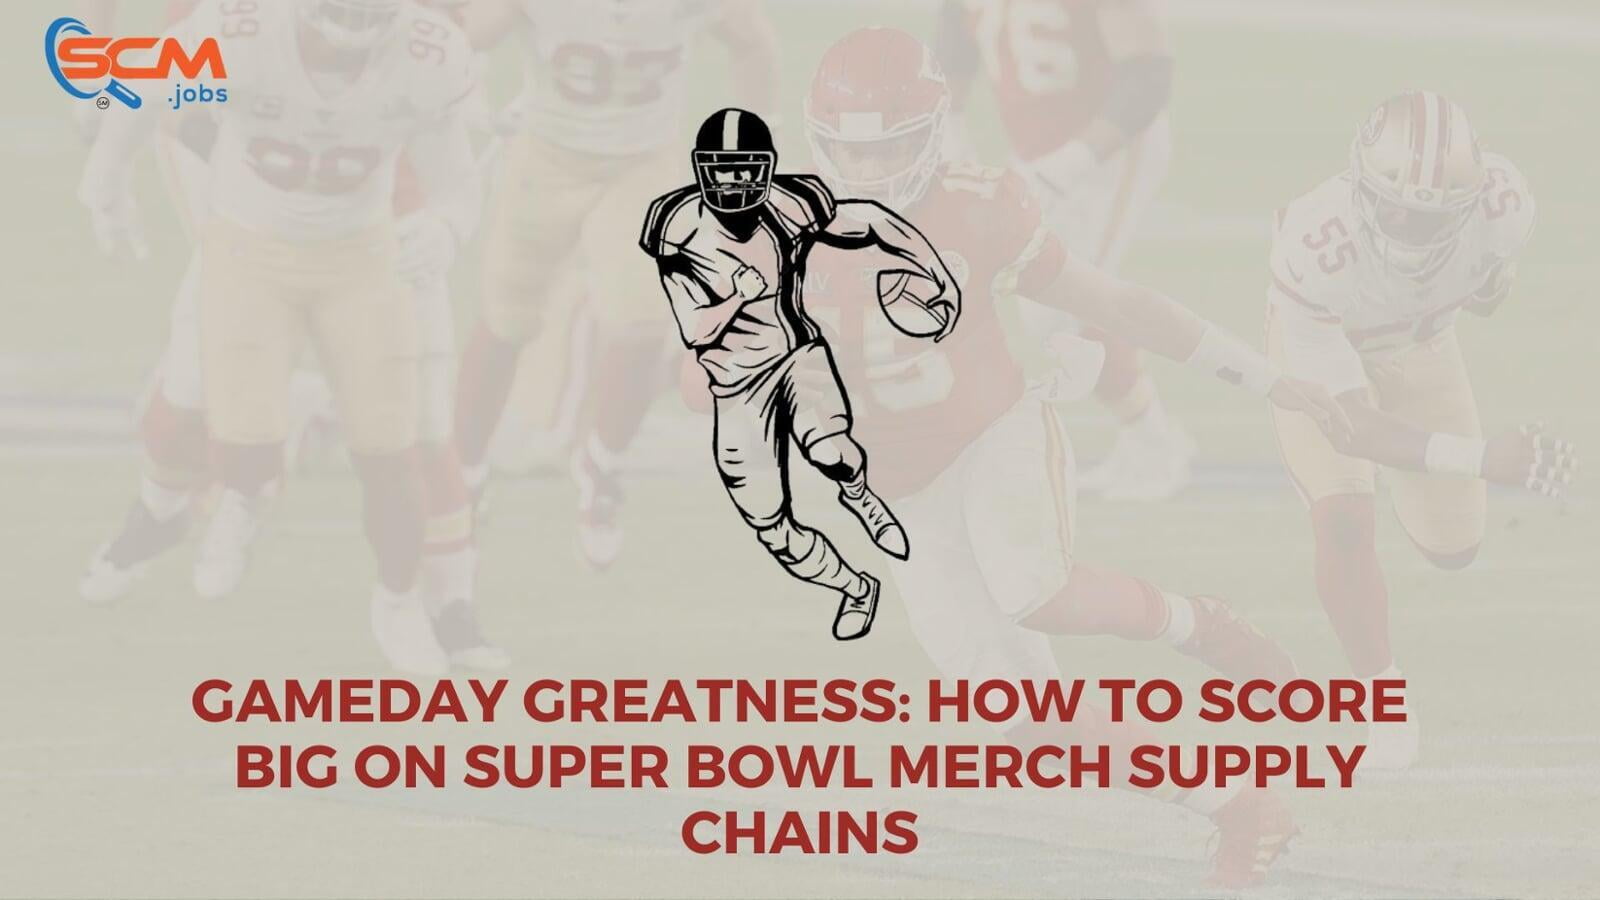 Gameday Greatness: How to Score Big on Super Bowl Merch Supply Chains